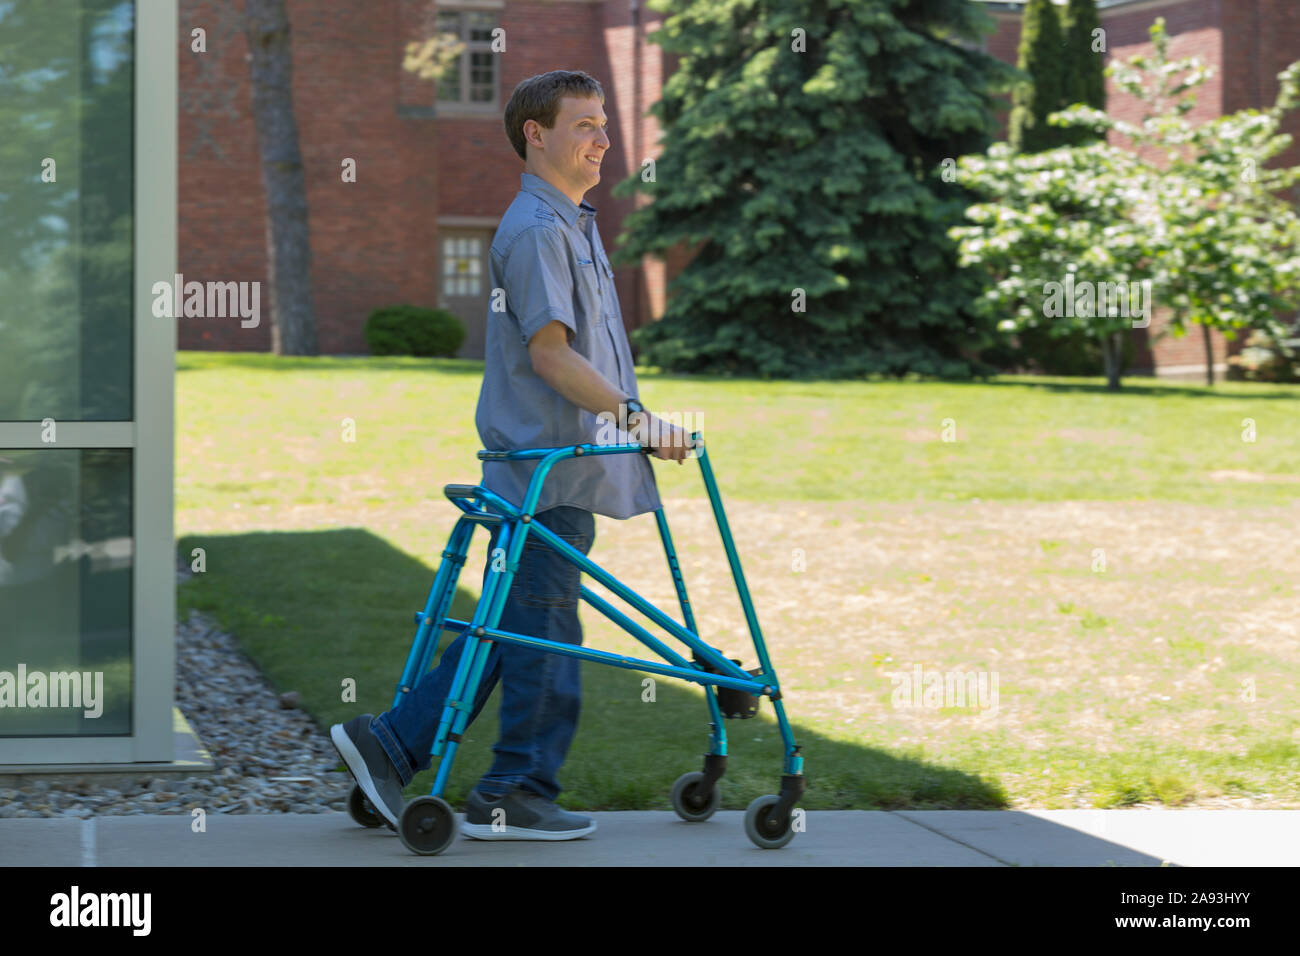 Young man with Cerebral Palsy using his walker to walk to work Stock Photo